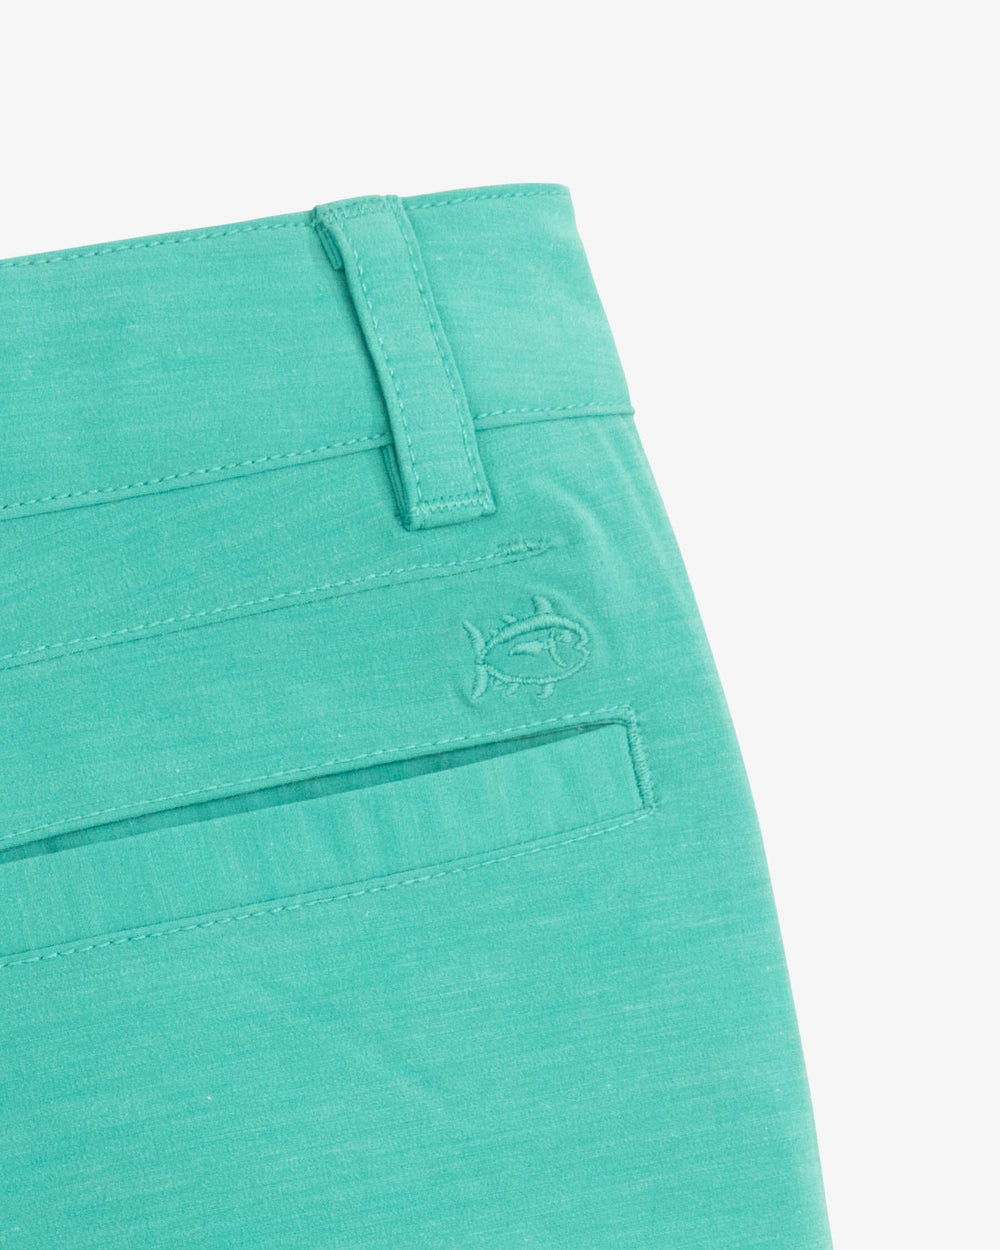 The detail view of the Southern Tide Boys Heathered T3 Gulf Short by Southern Tide - Heather Tidal Wave